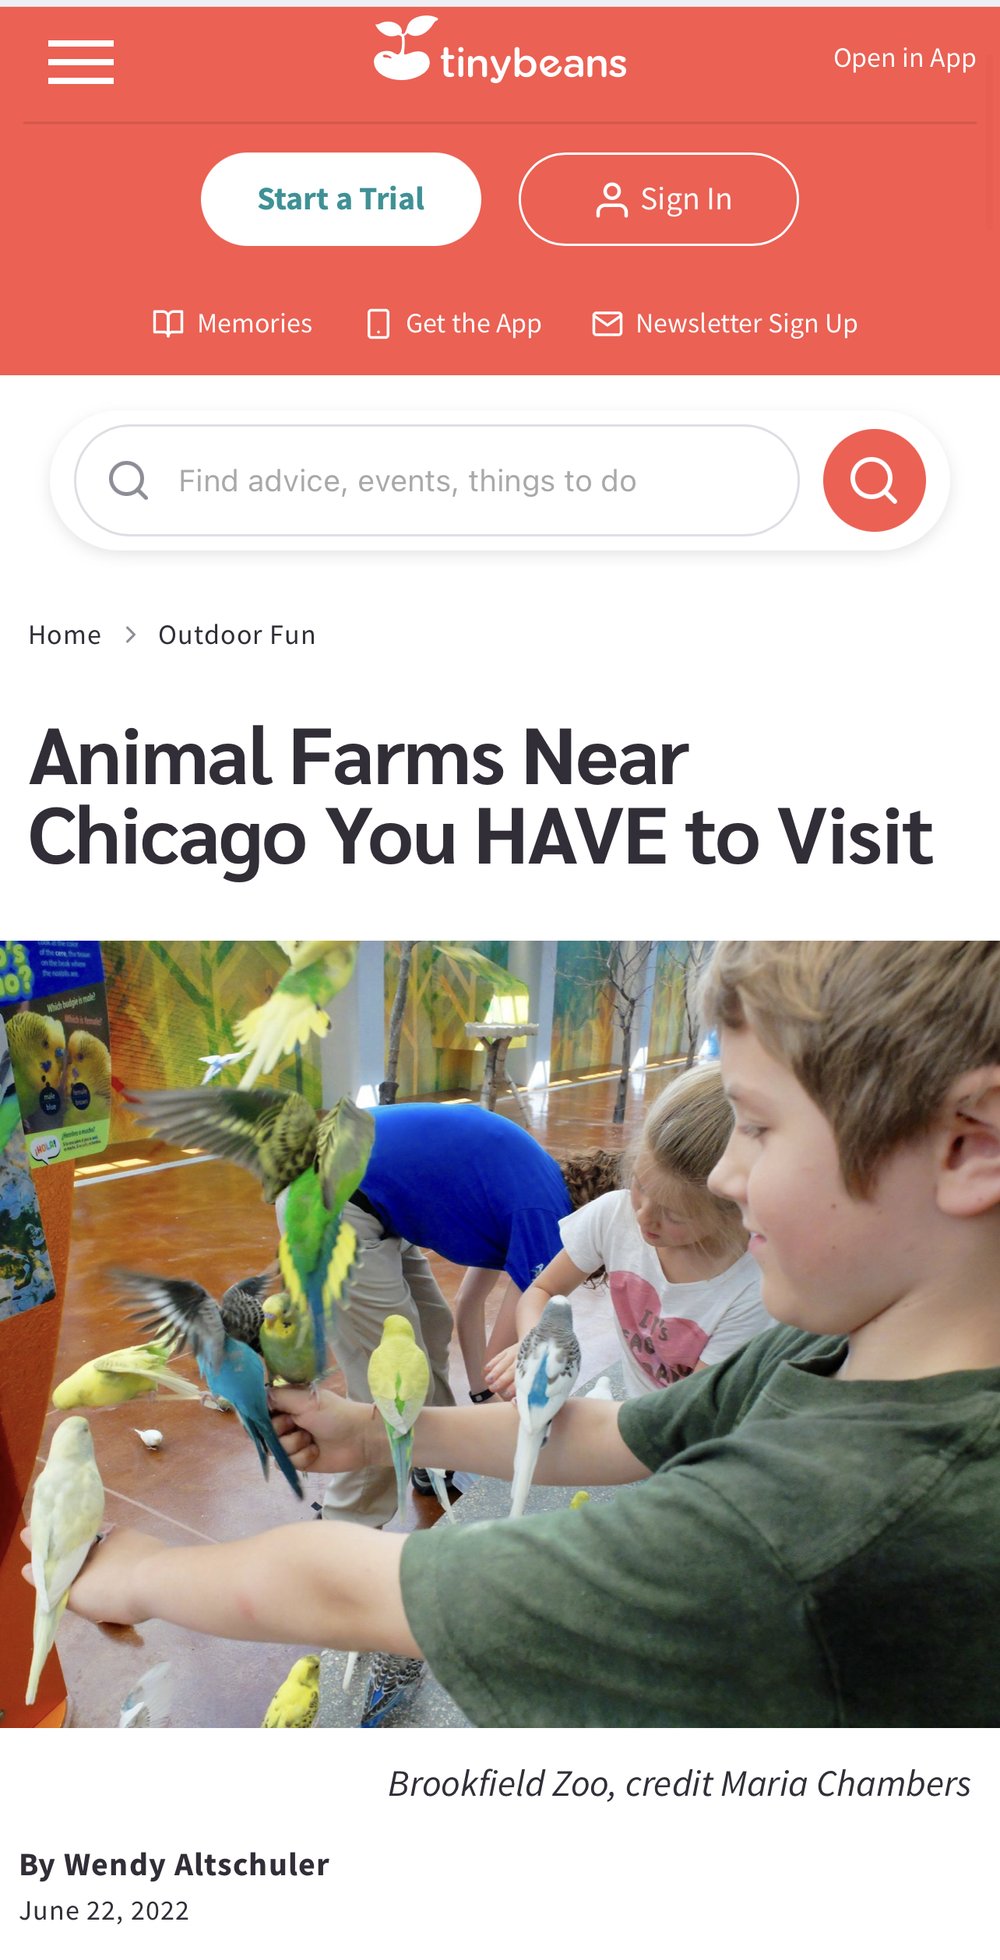 Animal Farms Near Chicago You HAVE to Visit